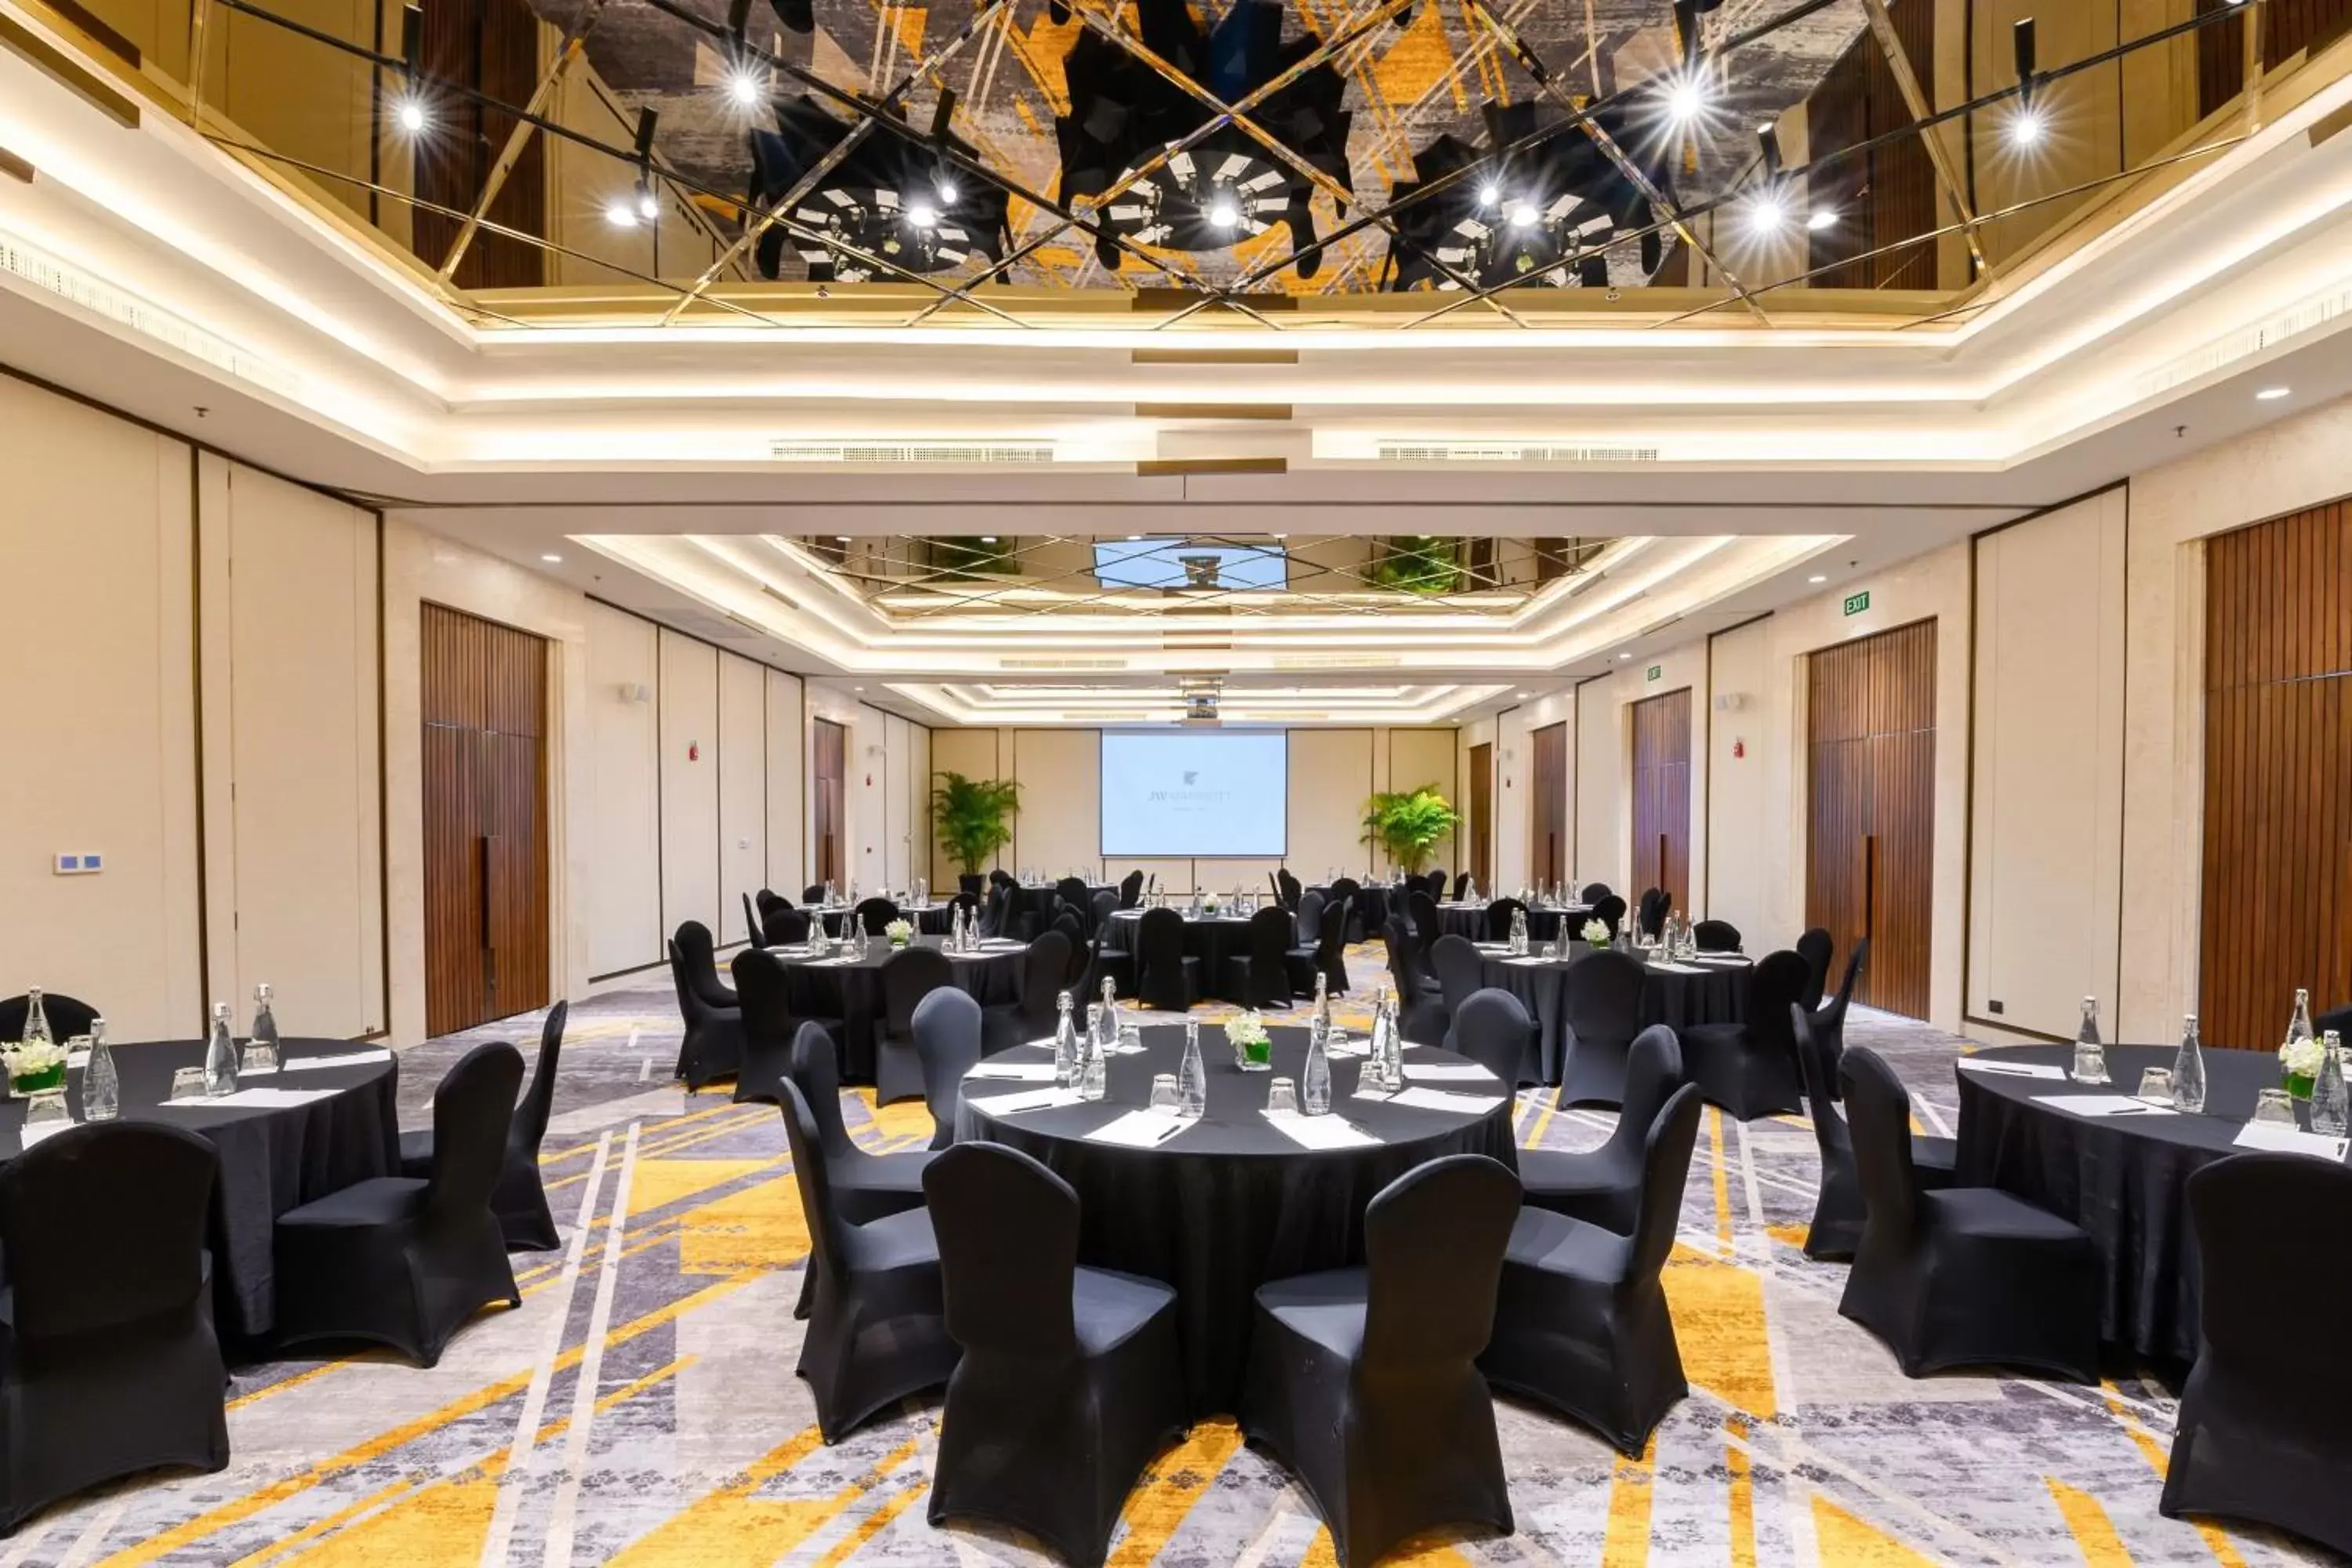 Meeting/conference room, Banquet Facilities in JW Marriott Khao Lak Resort and Spa